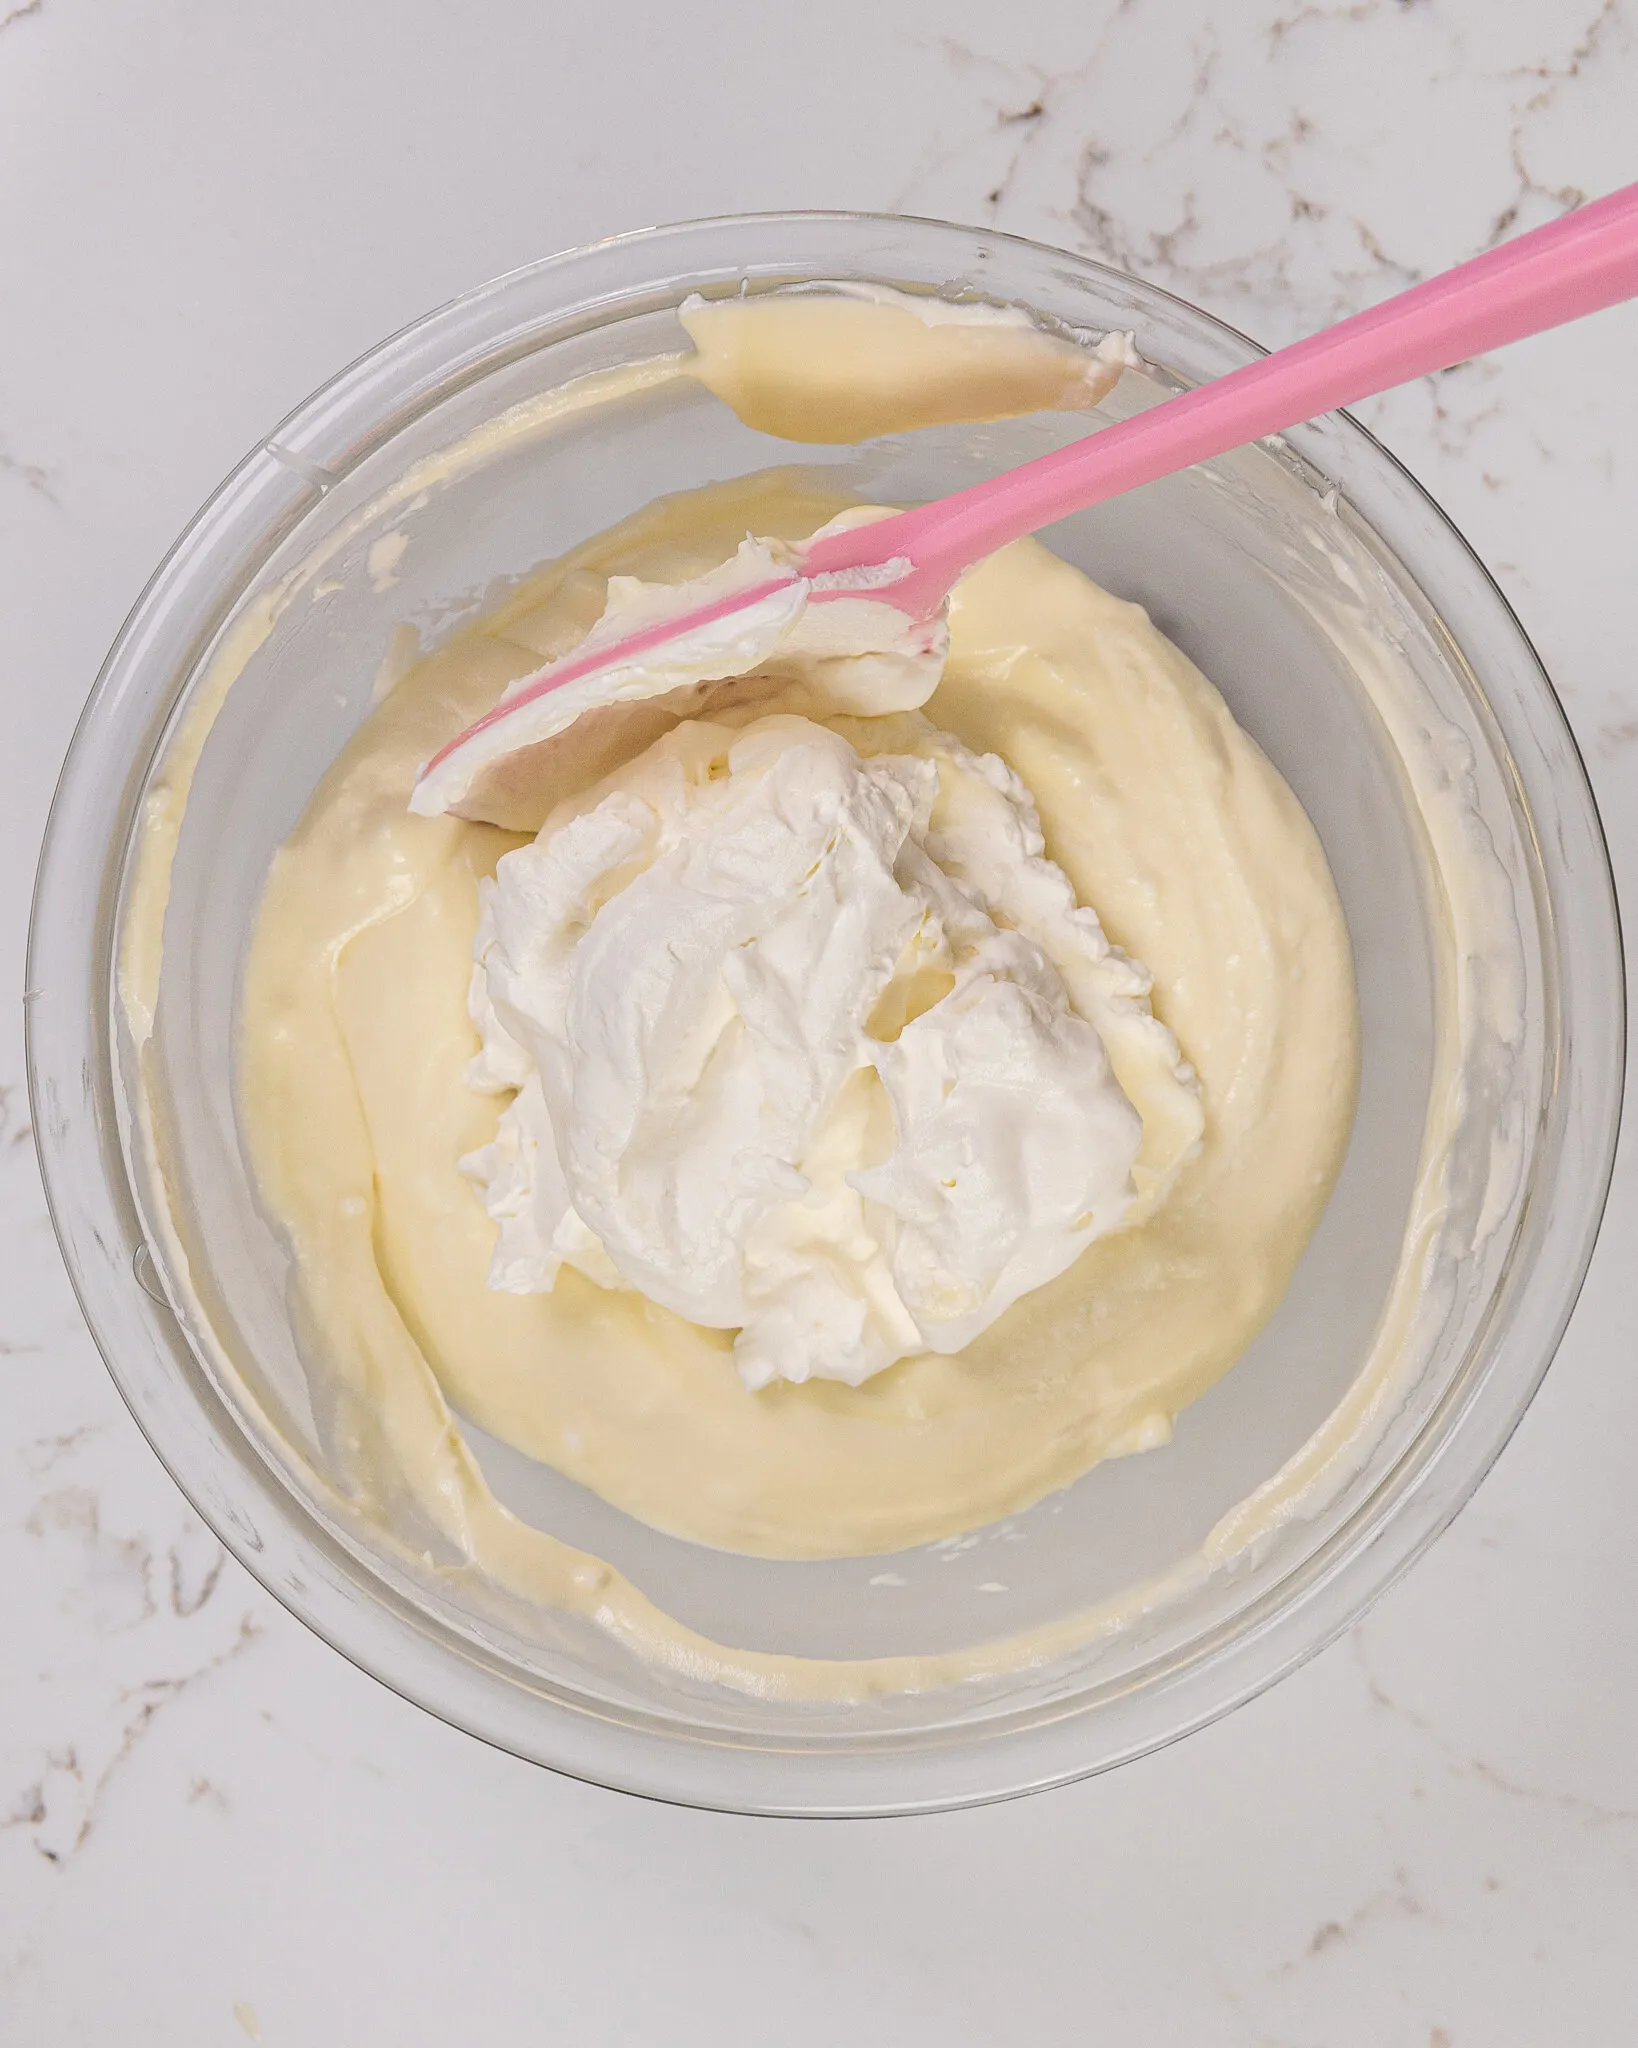 image of whipped cream being folded into white chocolate ganache to make a white chocolate mousse cake filling